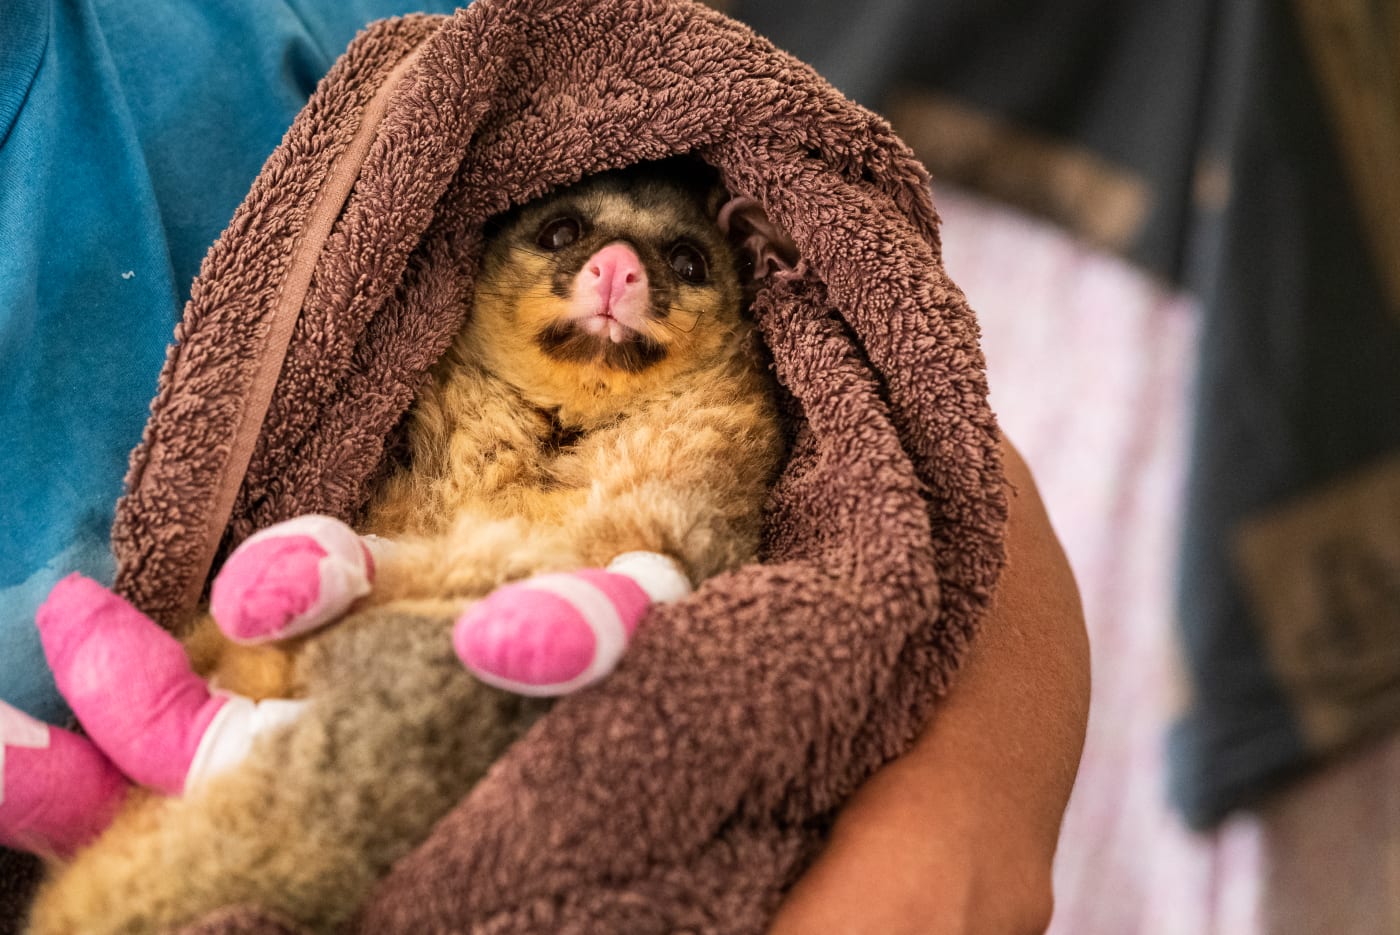 Minty, an injured possum that suffered burns to all four of his paws and his tail from the 2019-20 bushfires in care with Wildcare in Carwoola, NSW